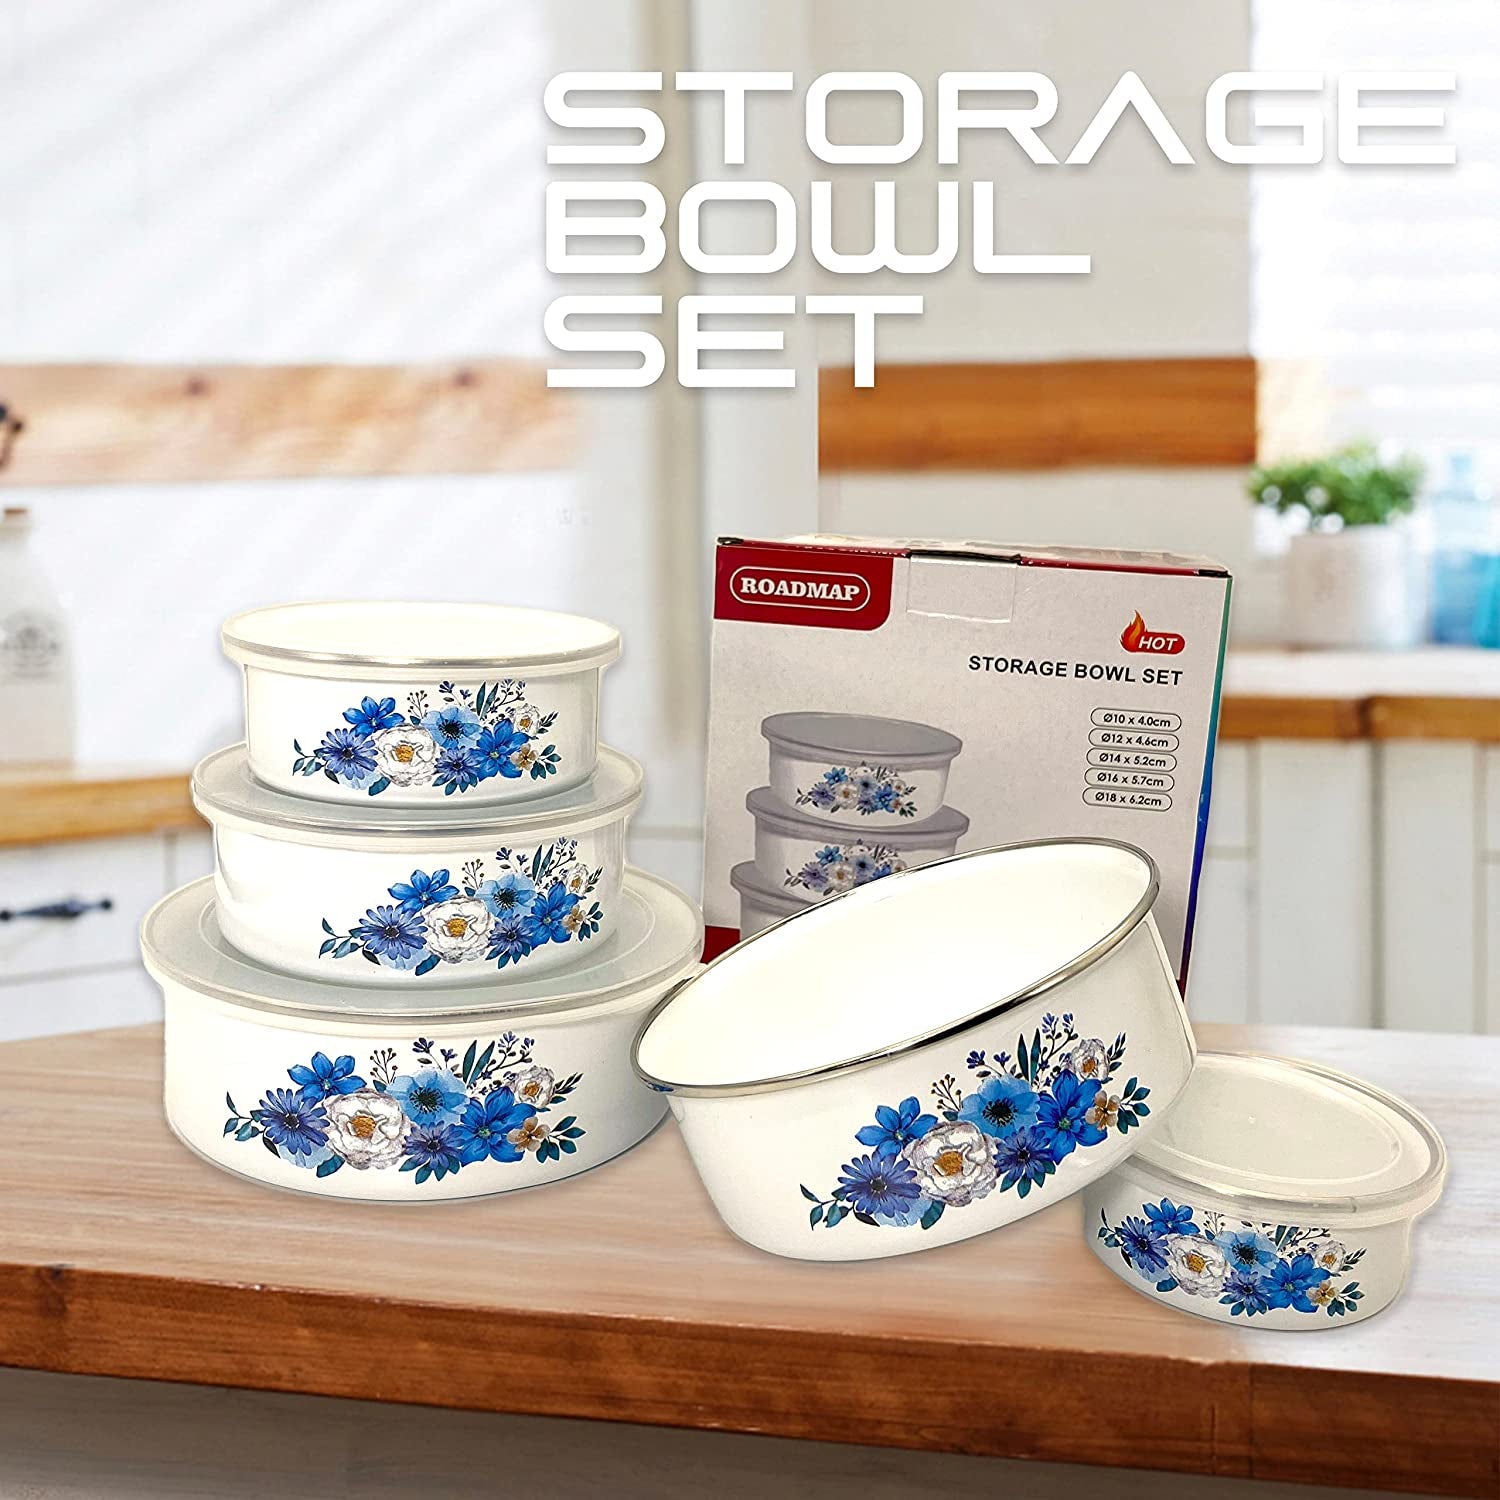 Mixing Bowls Sets for Kitchen Serving Fruit Cereal Ice Cream Salads Prepared Bowls 5 Pieces with Lid Metal Prep Baby Bowls Sugar Candy Nesting Food Storage Food Container Bowl  Roadmap   